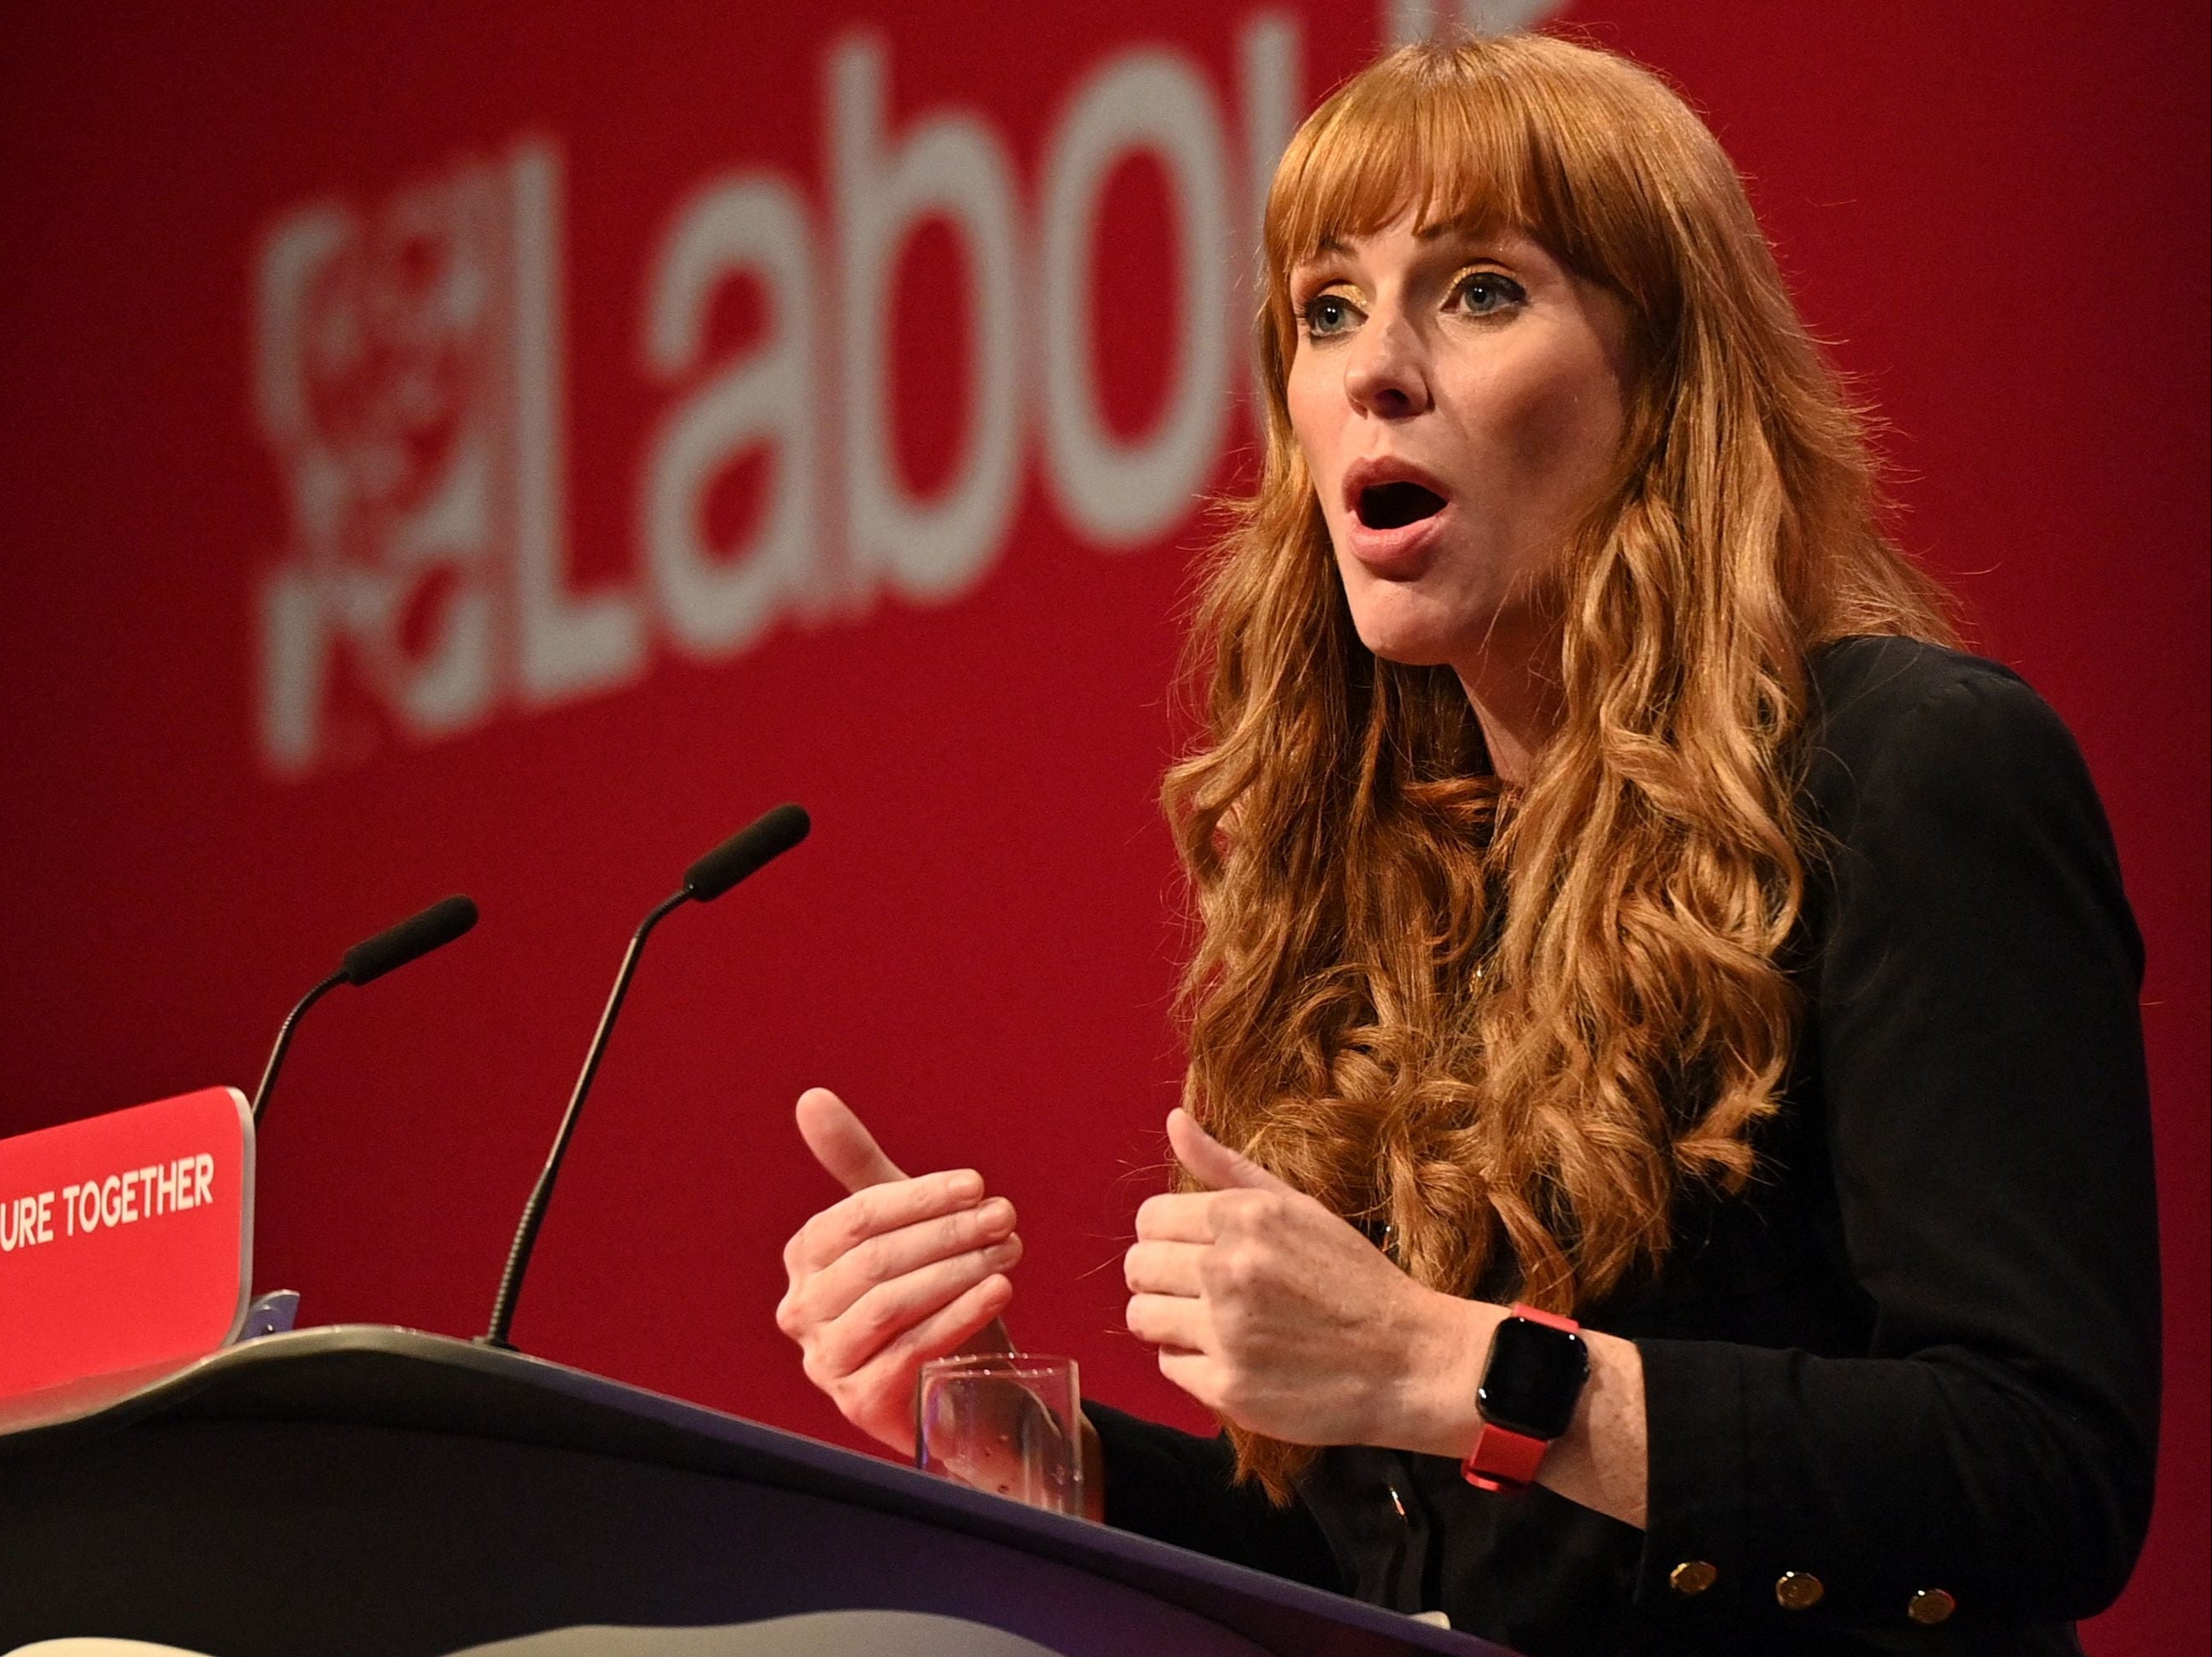 Angela Rayner speaking at Labour conference – before she called the Tories ‘scum’